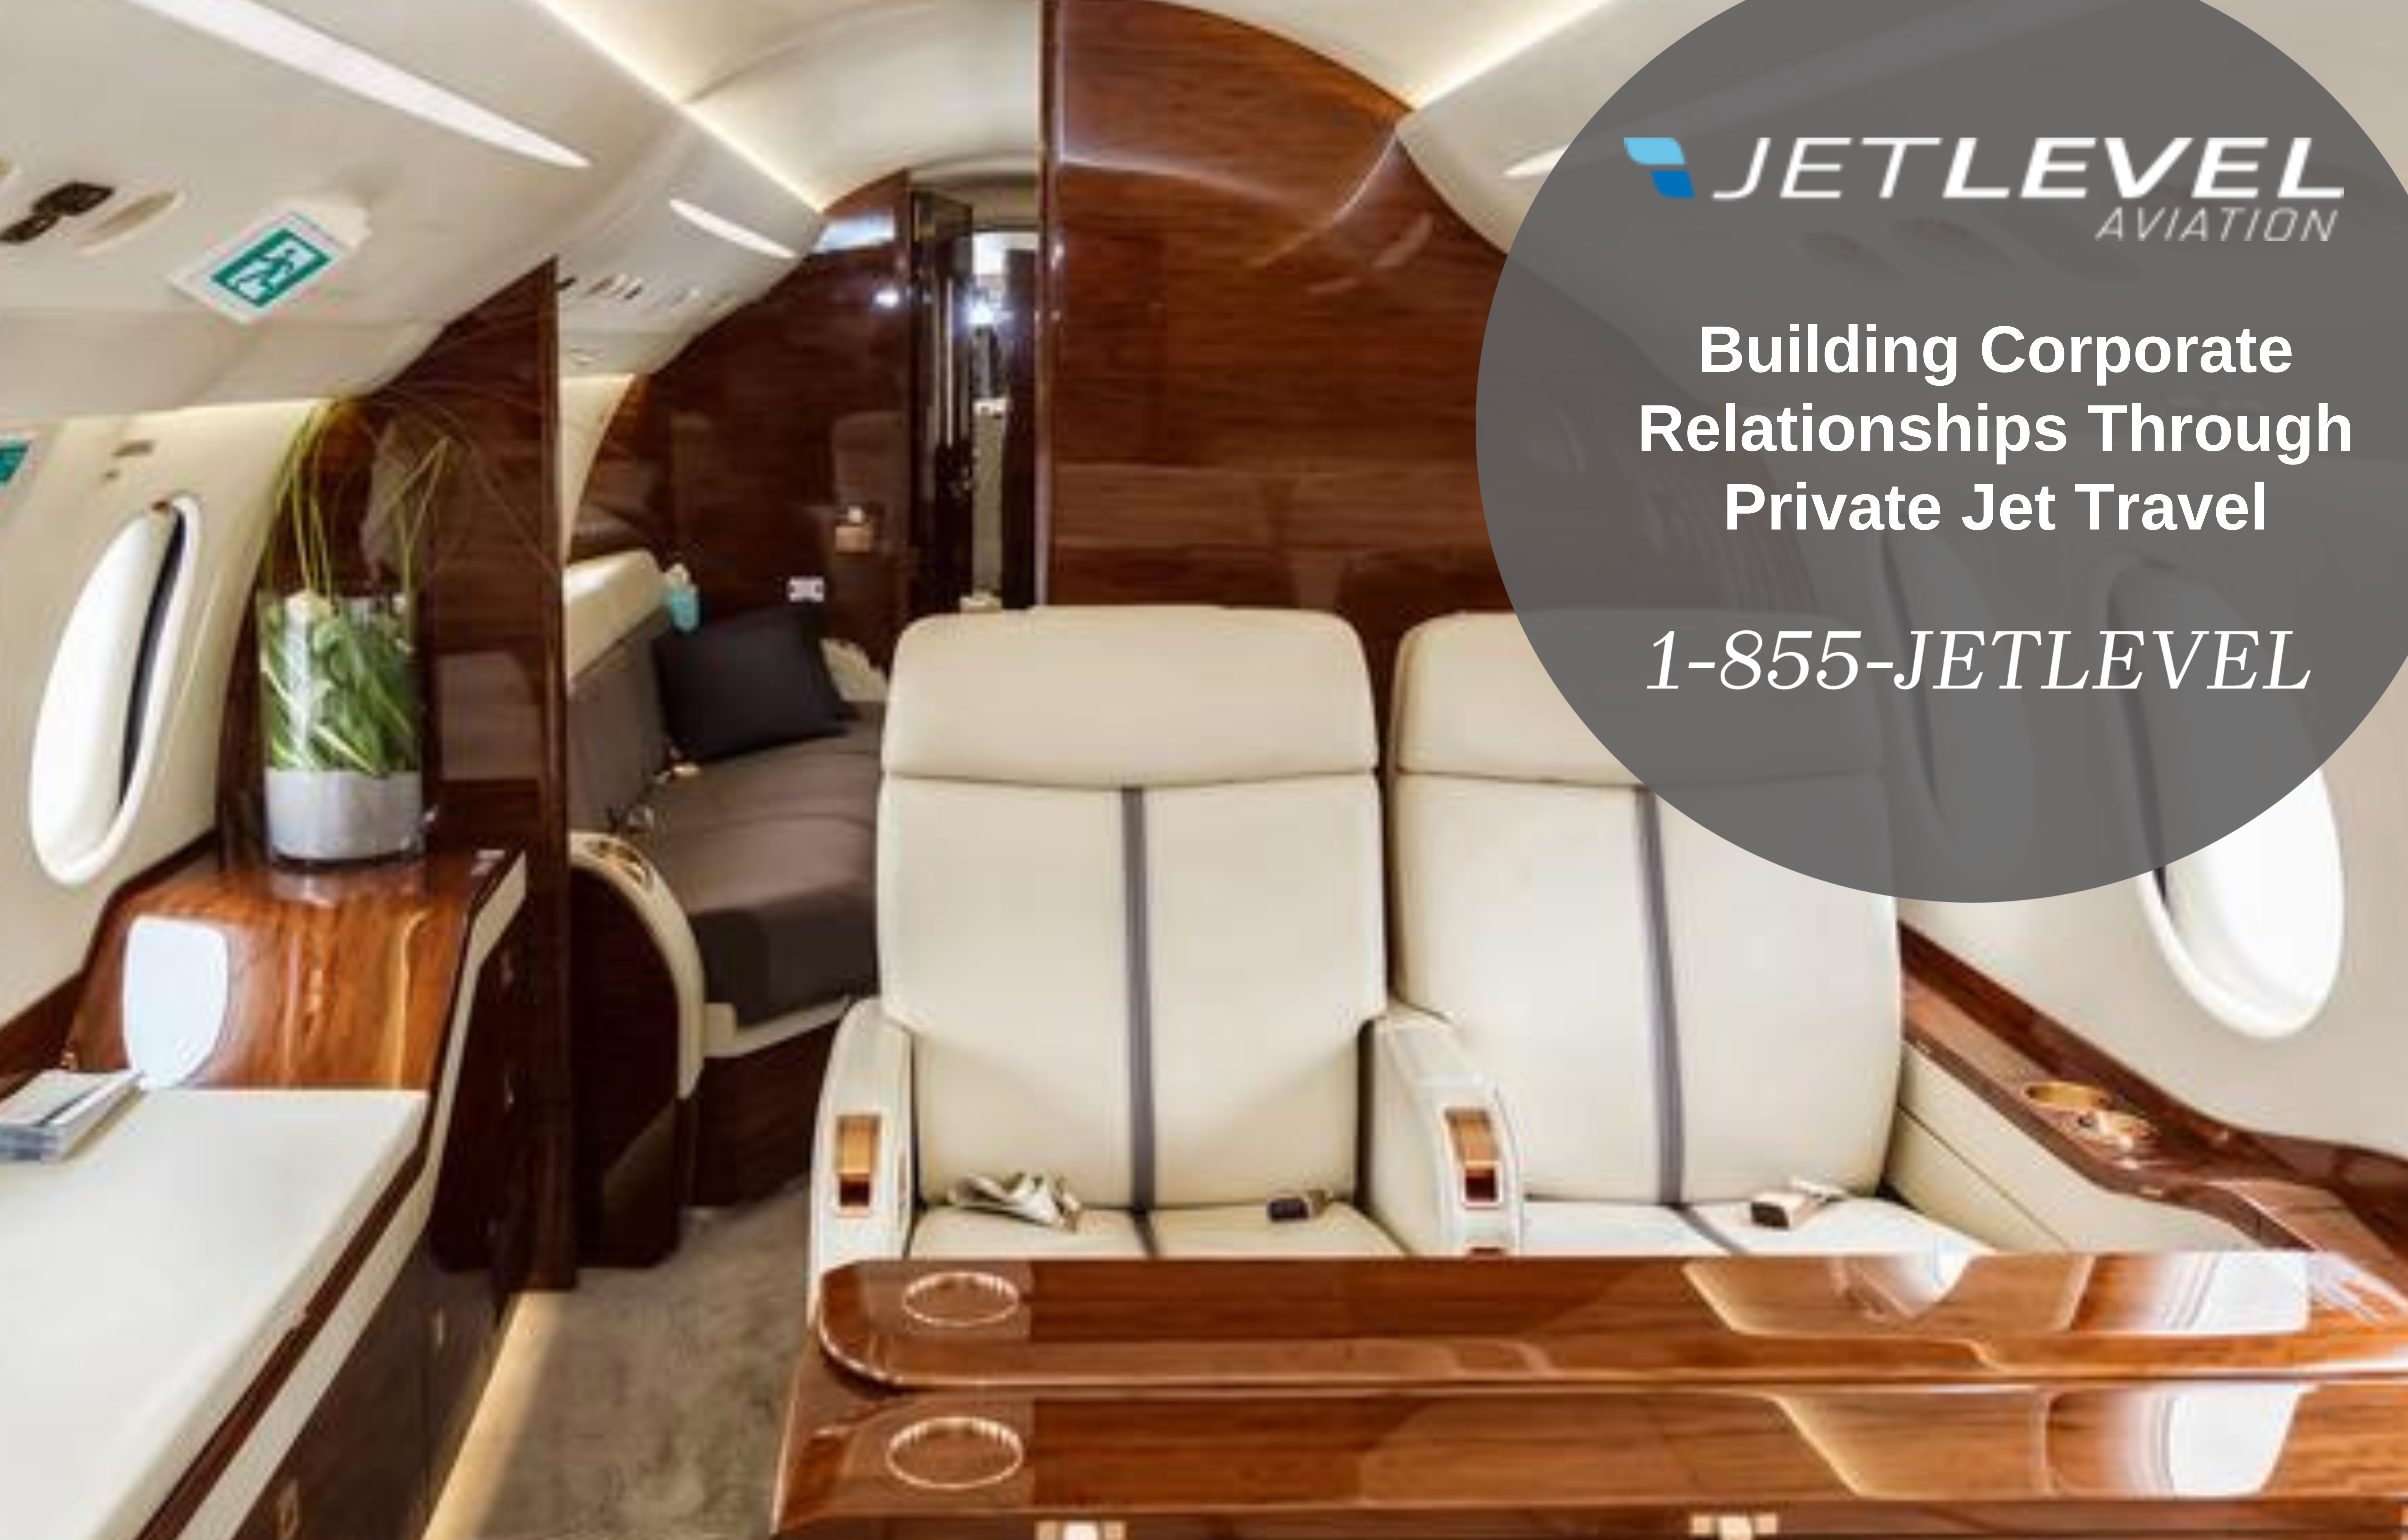 Building Corporate Relationships Through Private Jet Travel